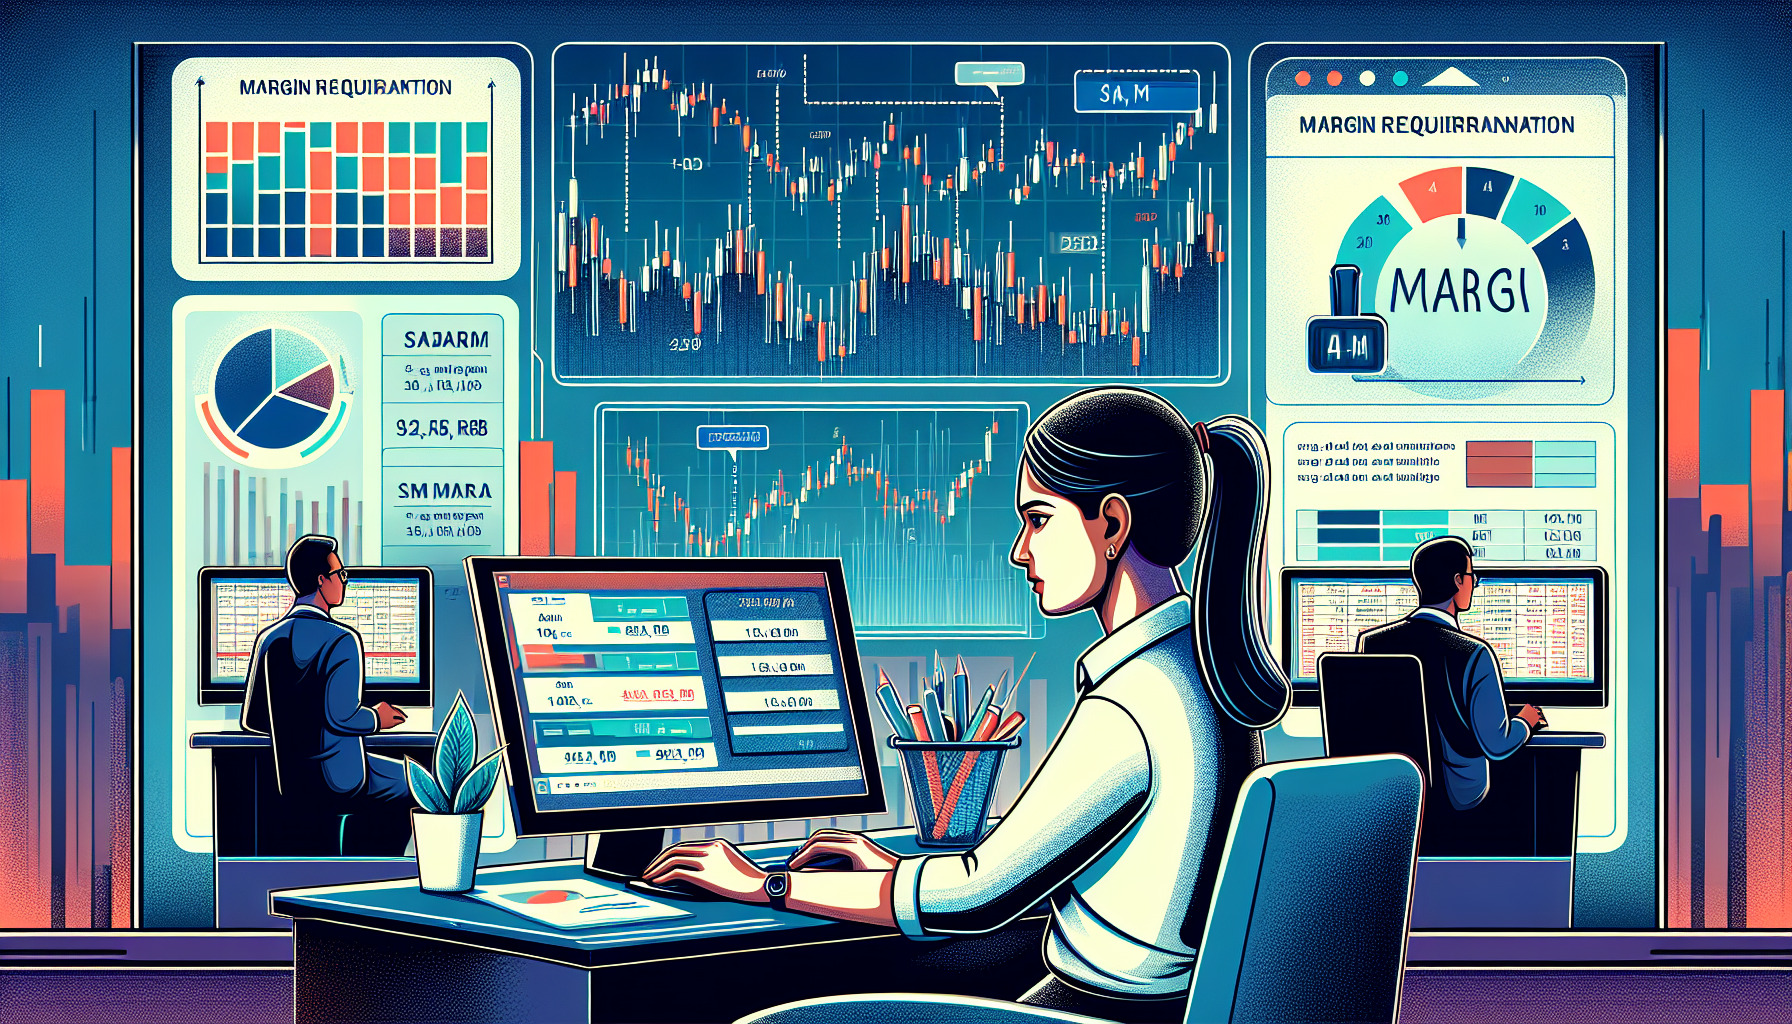 Create an informative and visually engaging image that represents the concept of 'Understanding TD Ameritrade Margin.' Include elements like financial charts, a TD Ameritrade logo, a margin requirement graph, and an investor analyzing data on a computer screen. The background should evoke a professional, modern atmosphere, reminiscent of a trading floor or financial office.